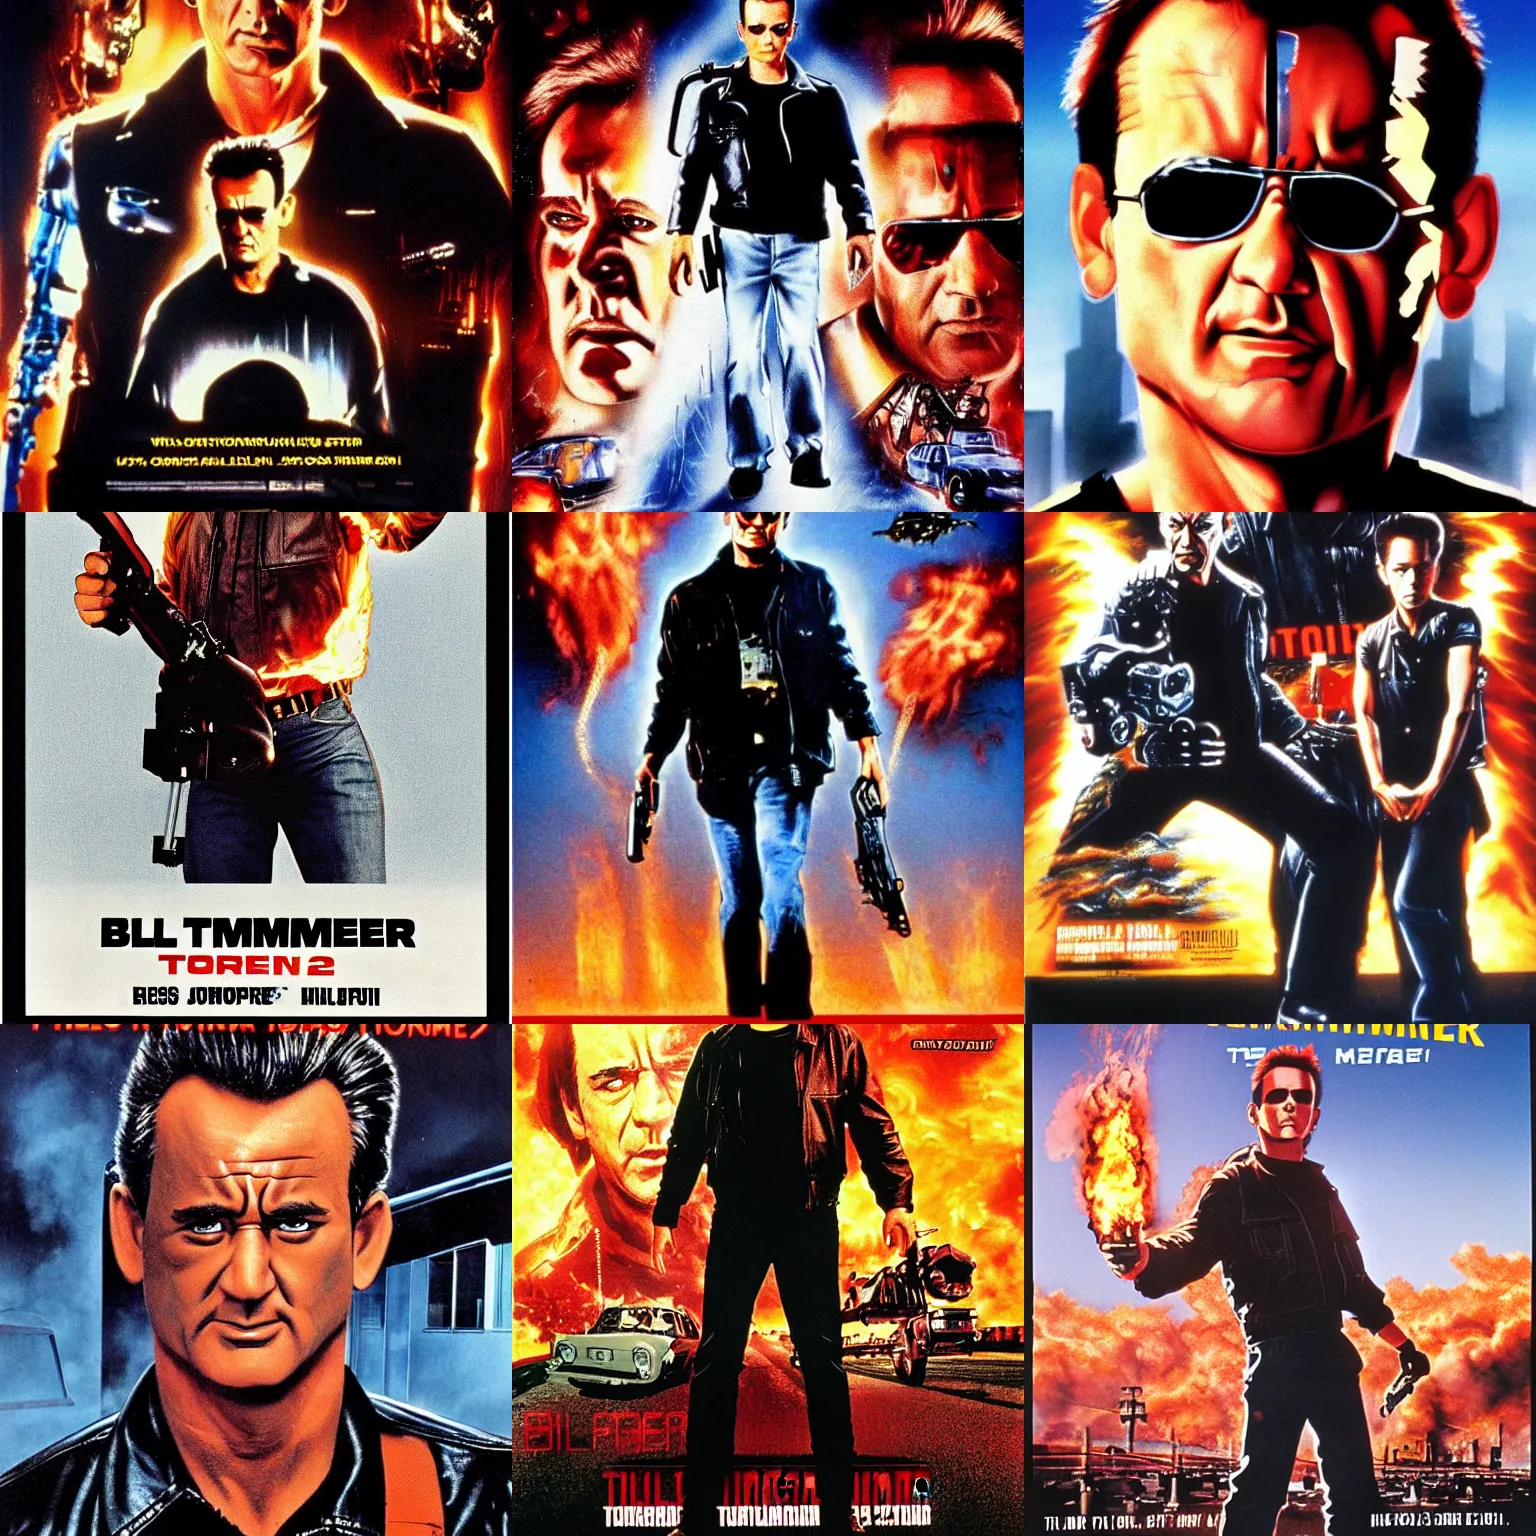 Prompt: movie poster of terminator 2 starring bill murray